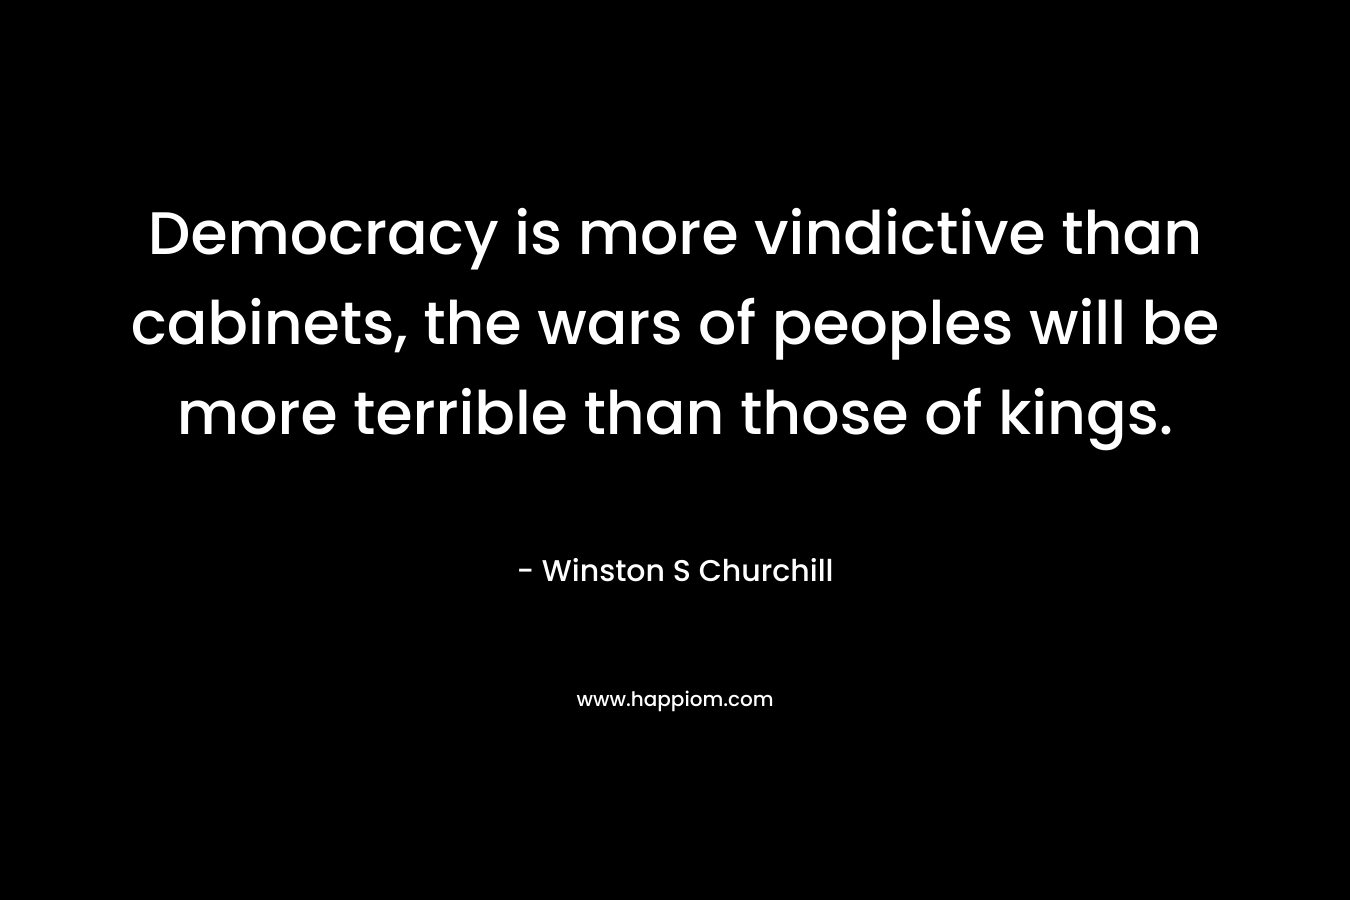 Democracy is more vindictive than cabinets, the wars of peoples will be more terrible than those of kings.